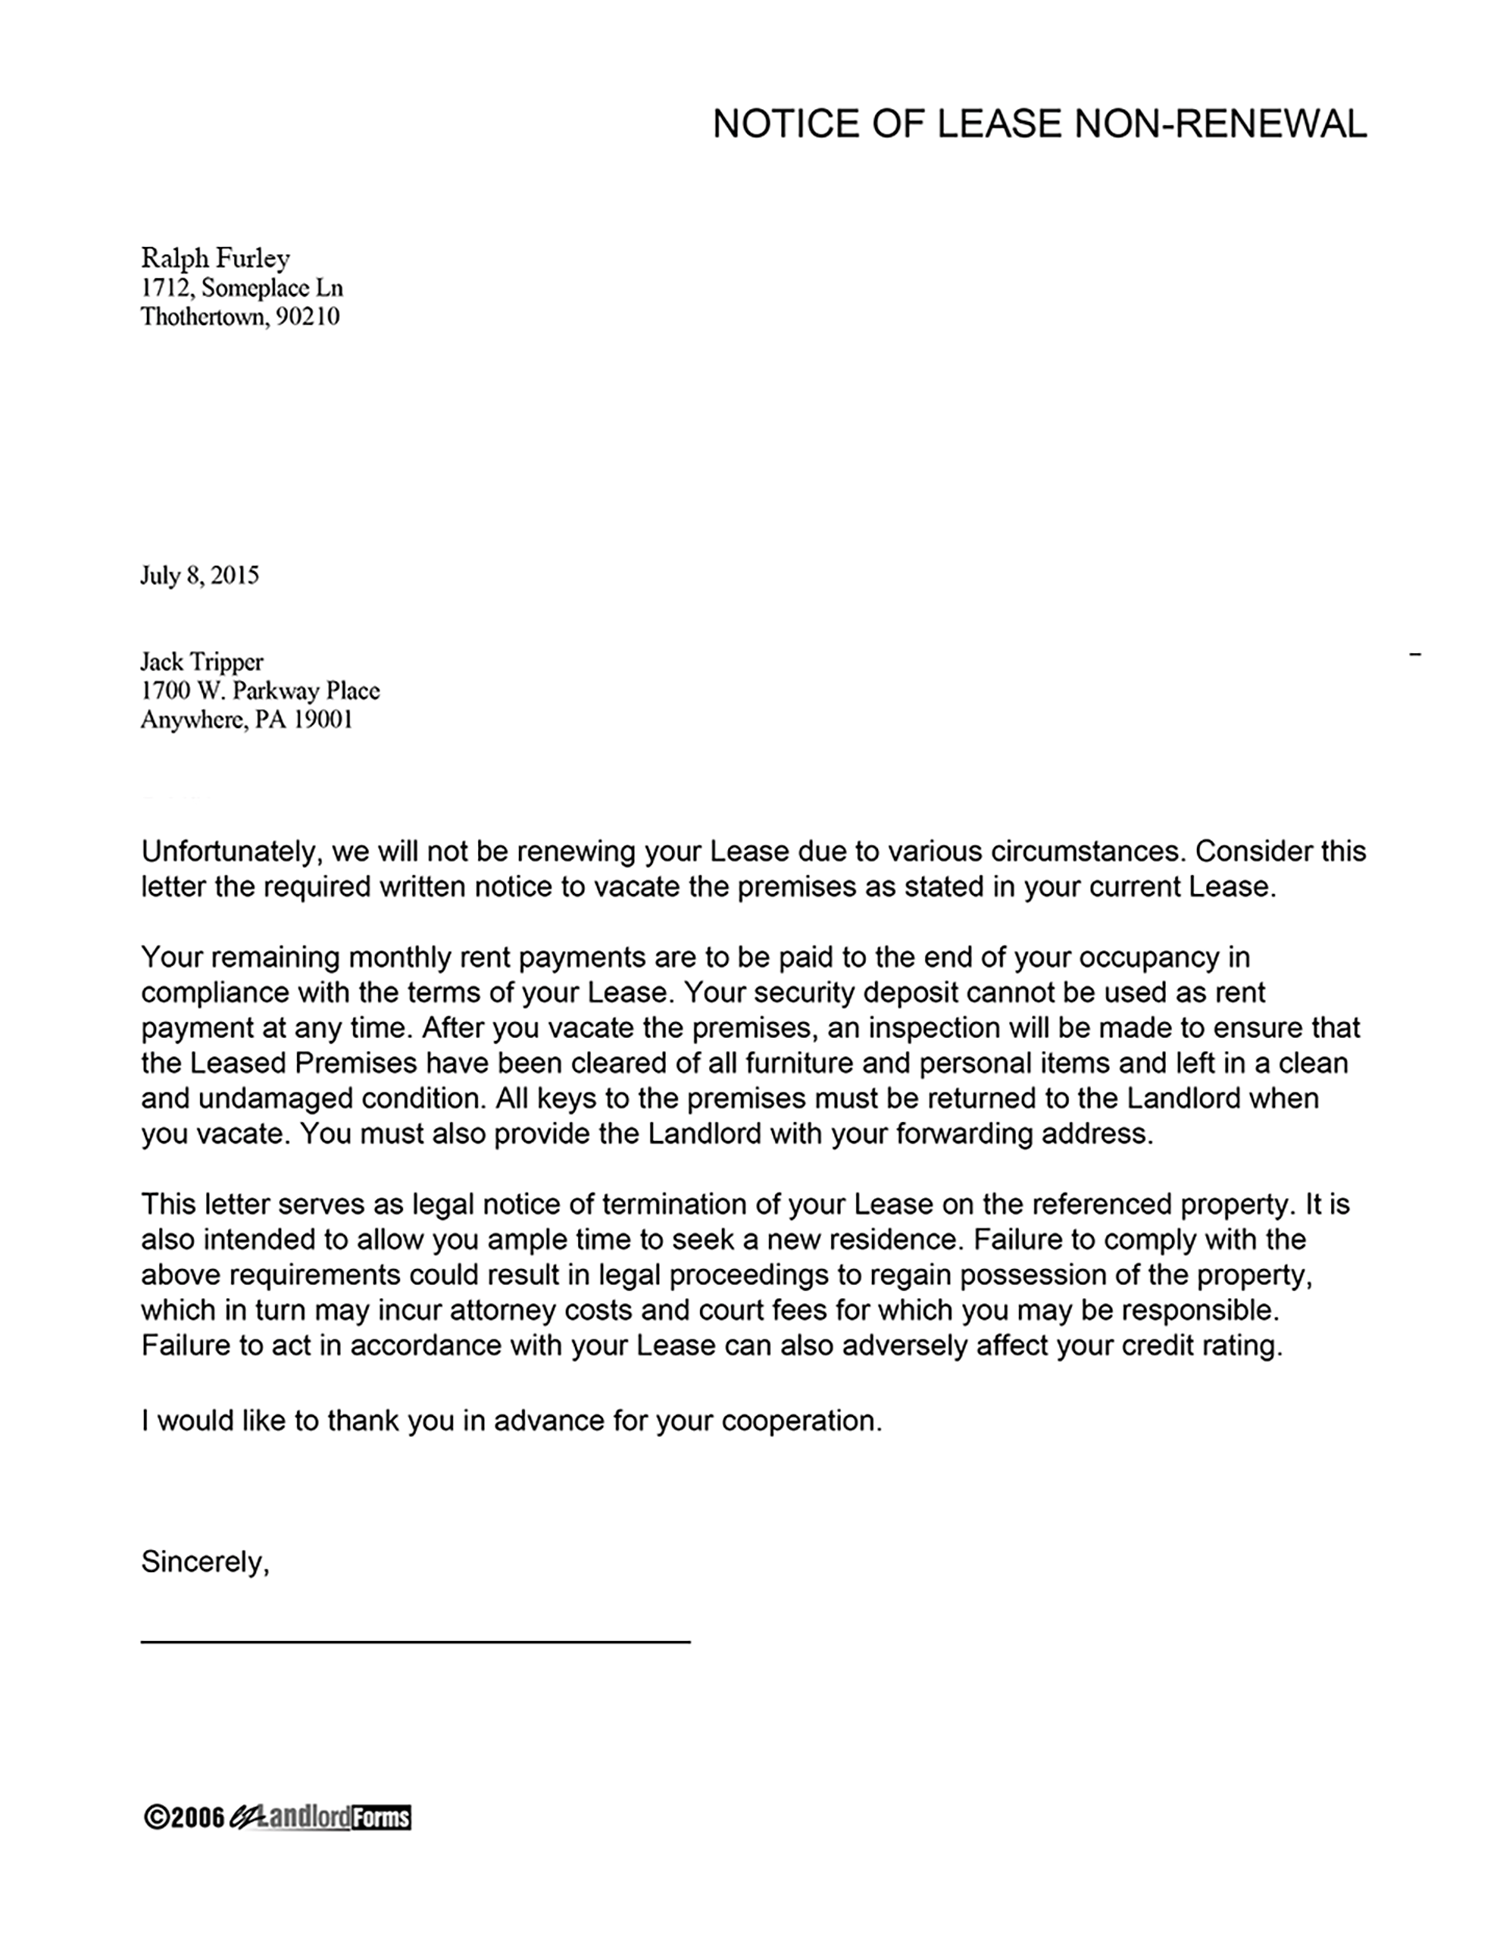 Sample Letter To End Lease Agreement from www.ezlandlordforms.com